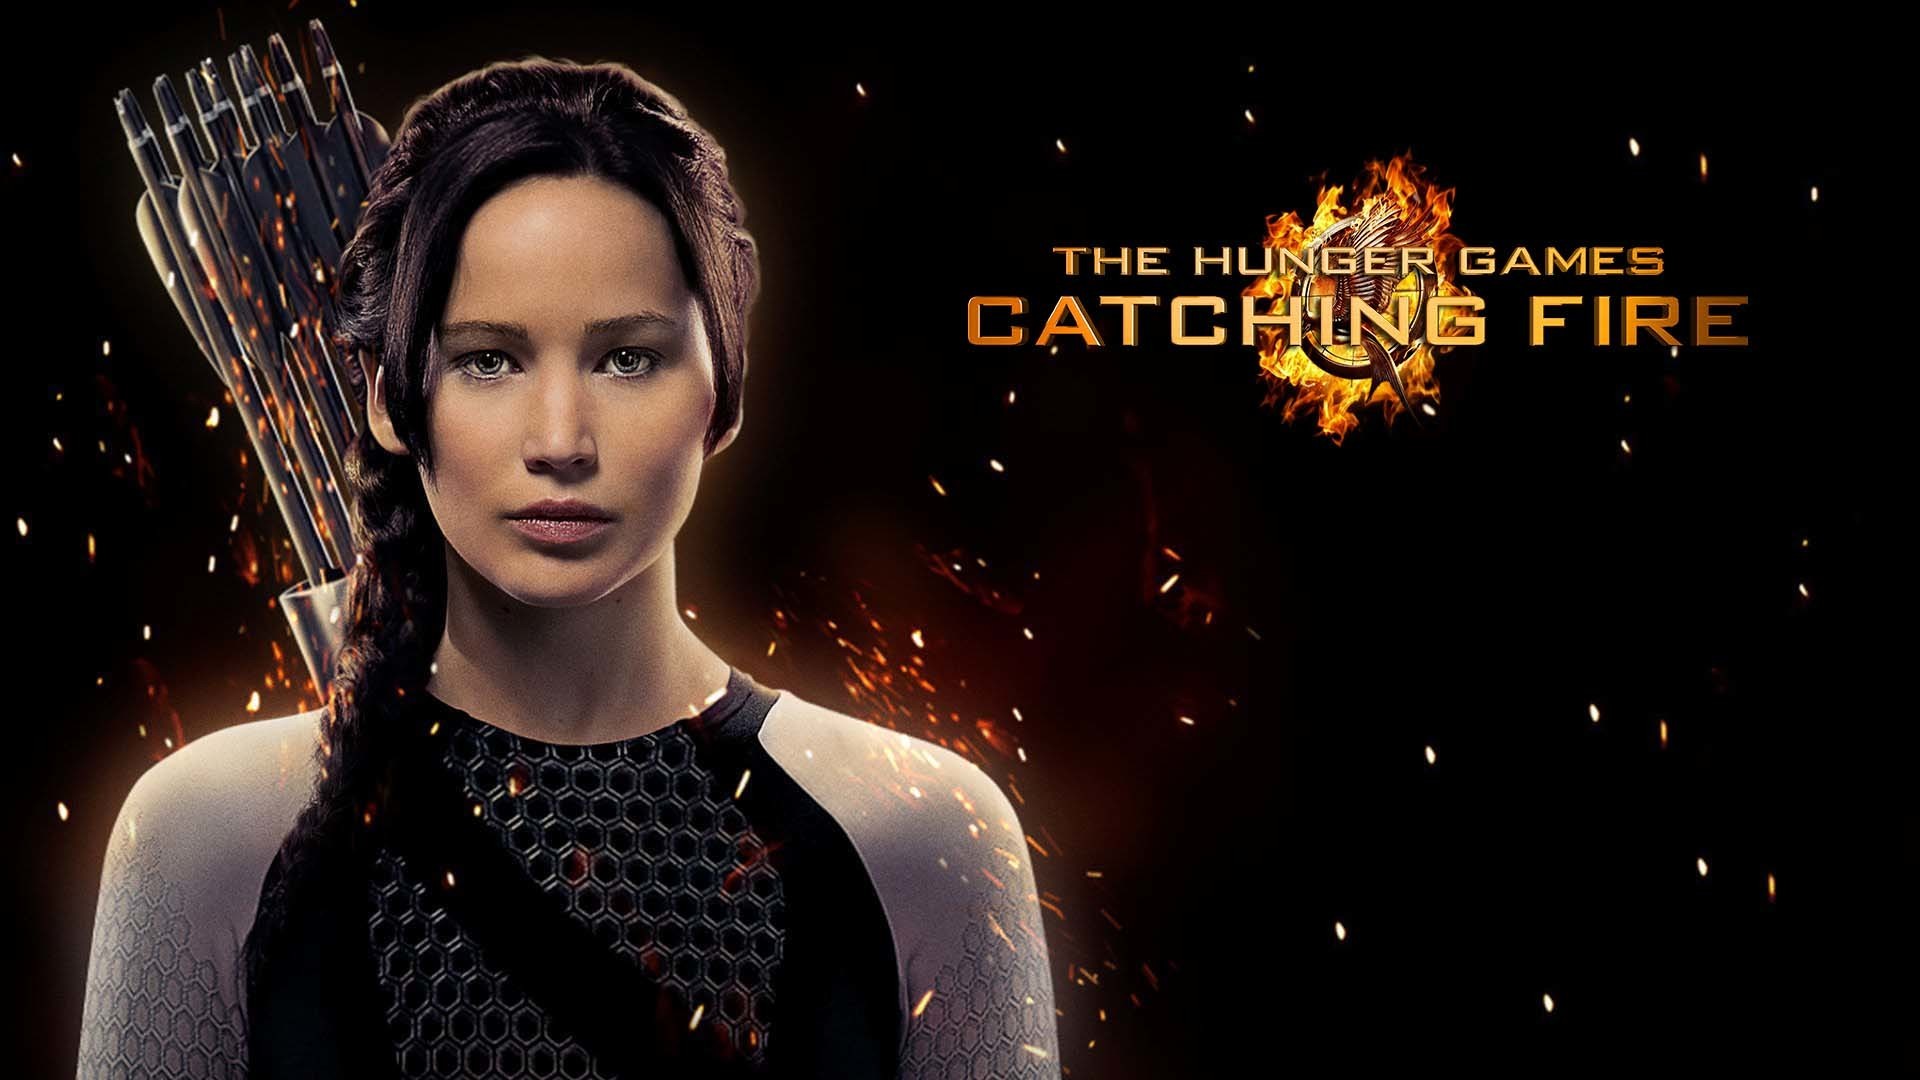 download the new The Hunger Games: Catching Fire